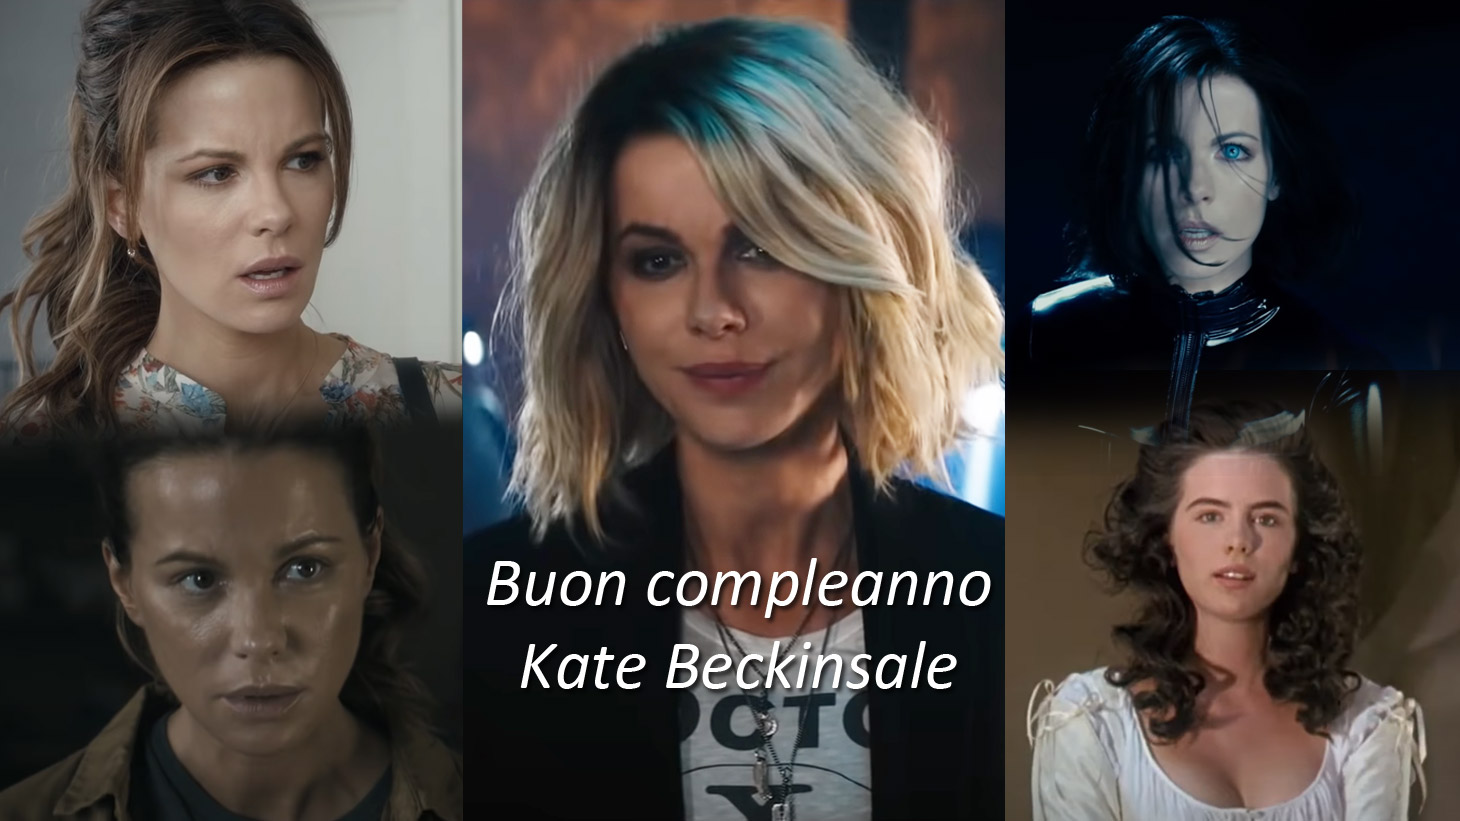 Buon compleanno, Kate Beckinsale